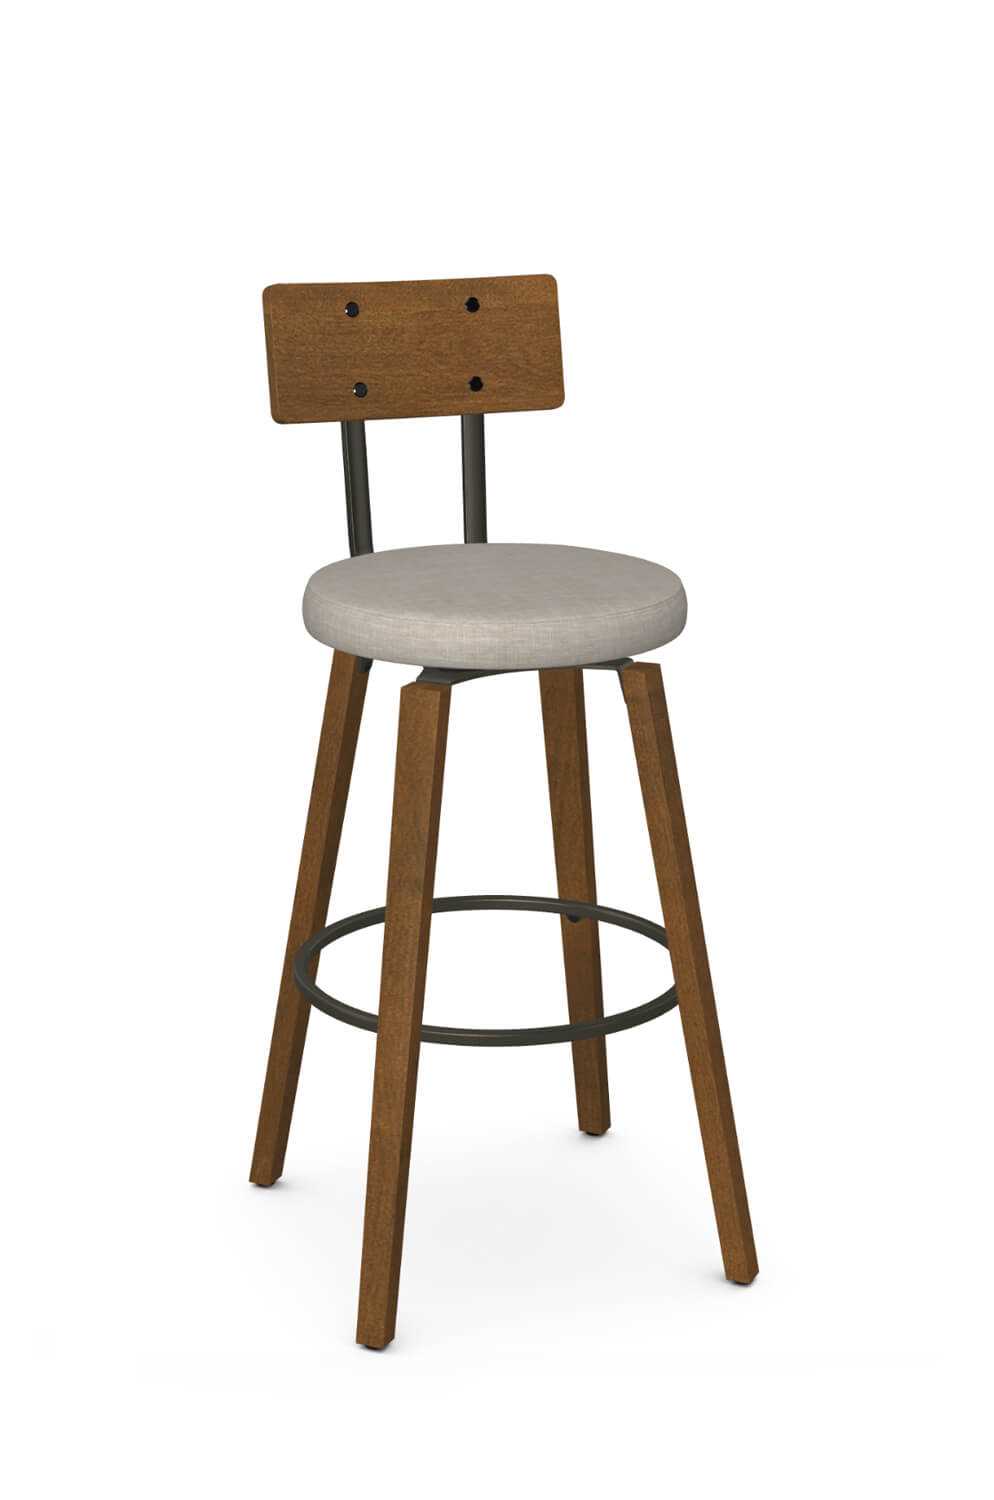 Stylish and Durable Wooden Bar Stools